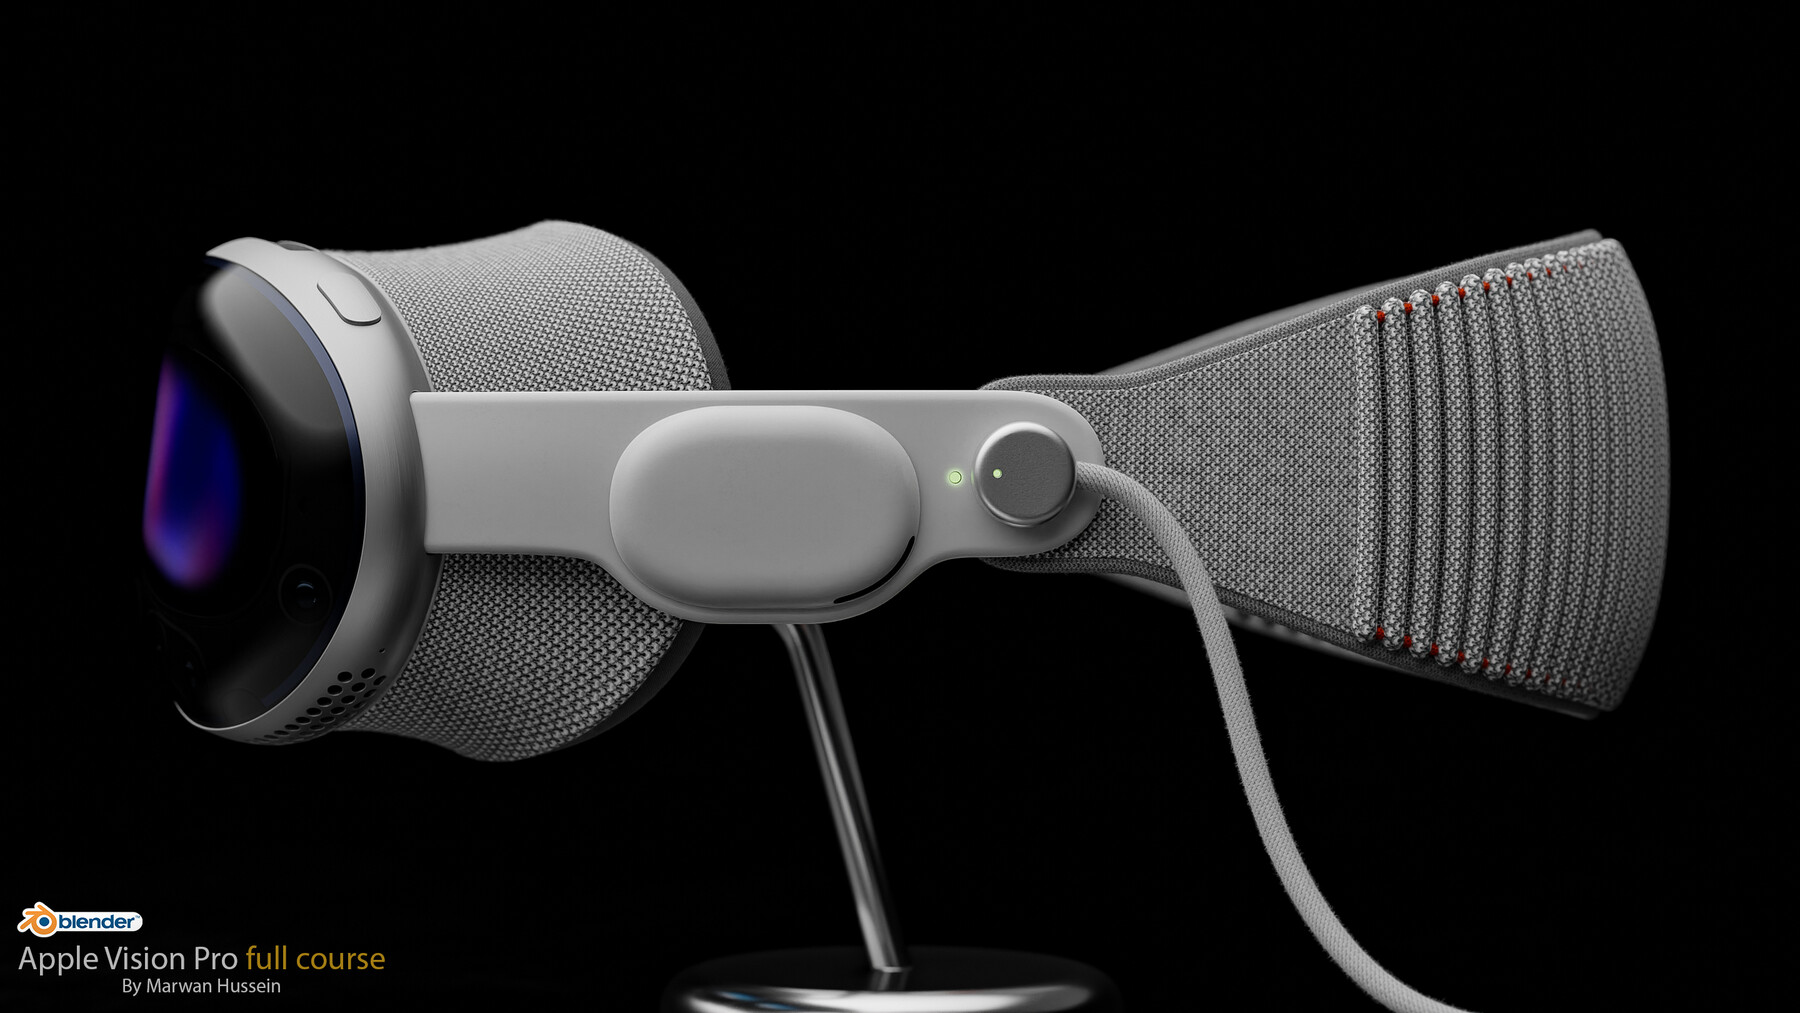 BLENDER: The Rode NT microphone creation masterclass